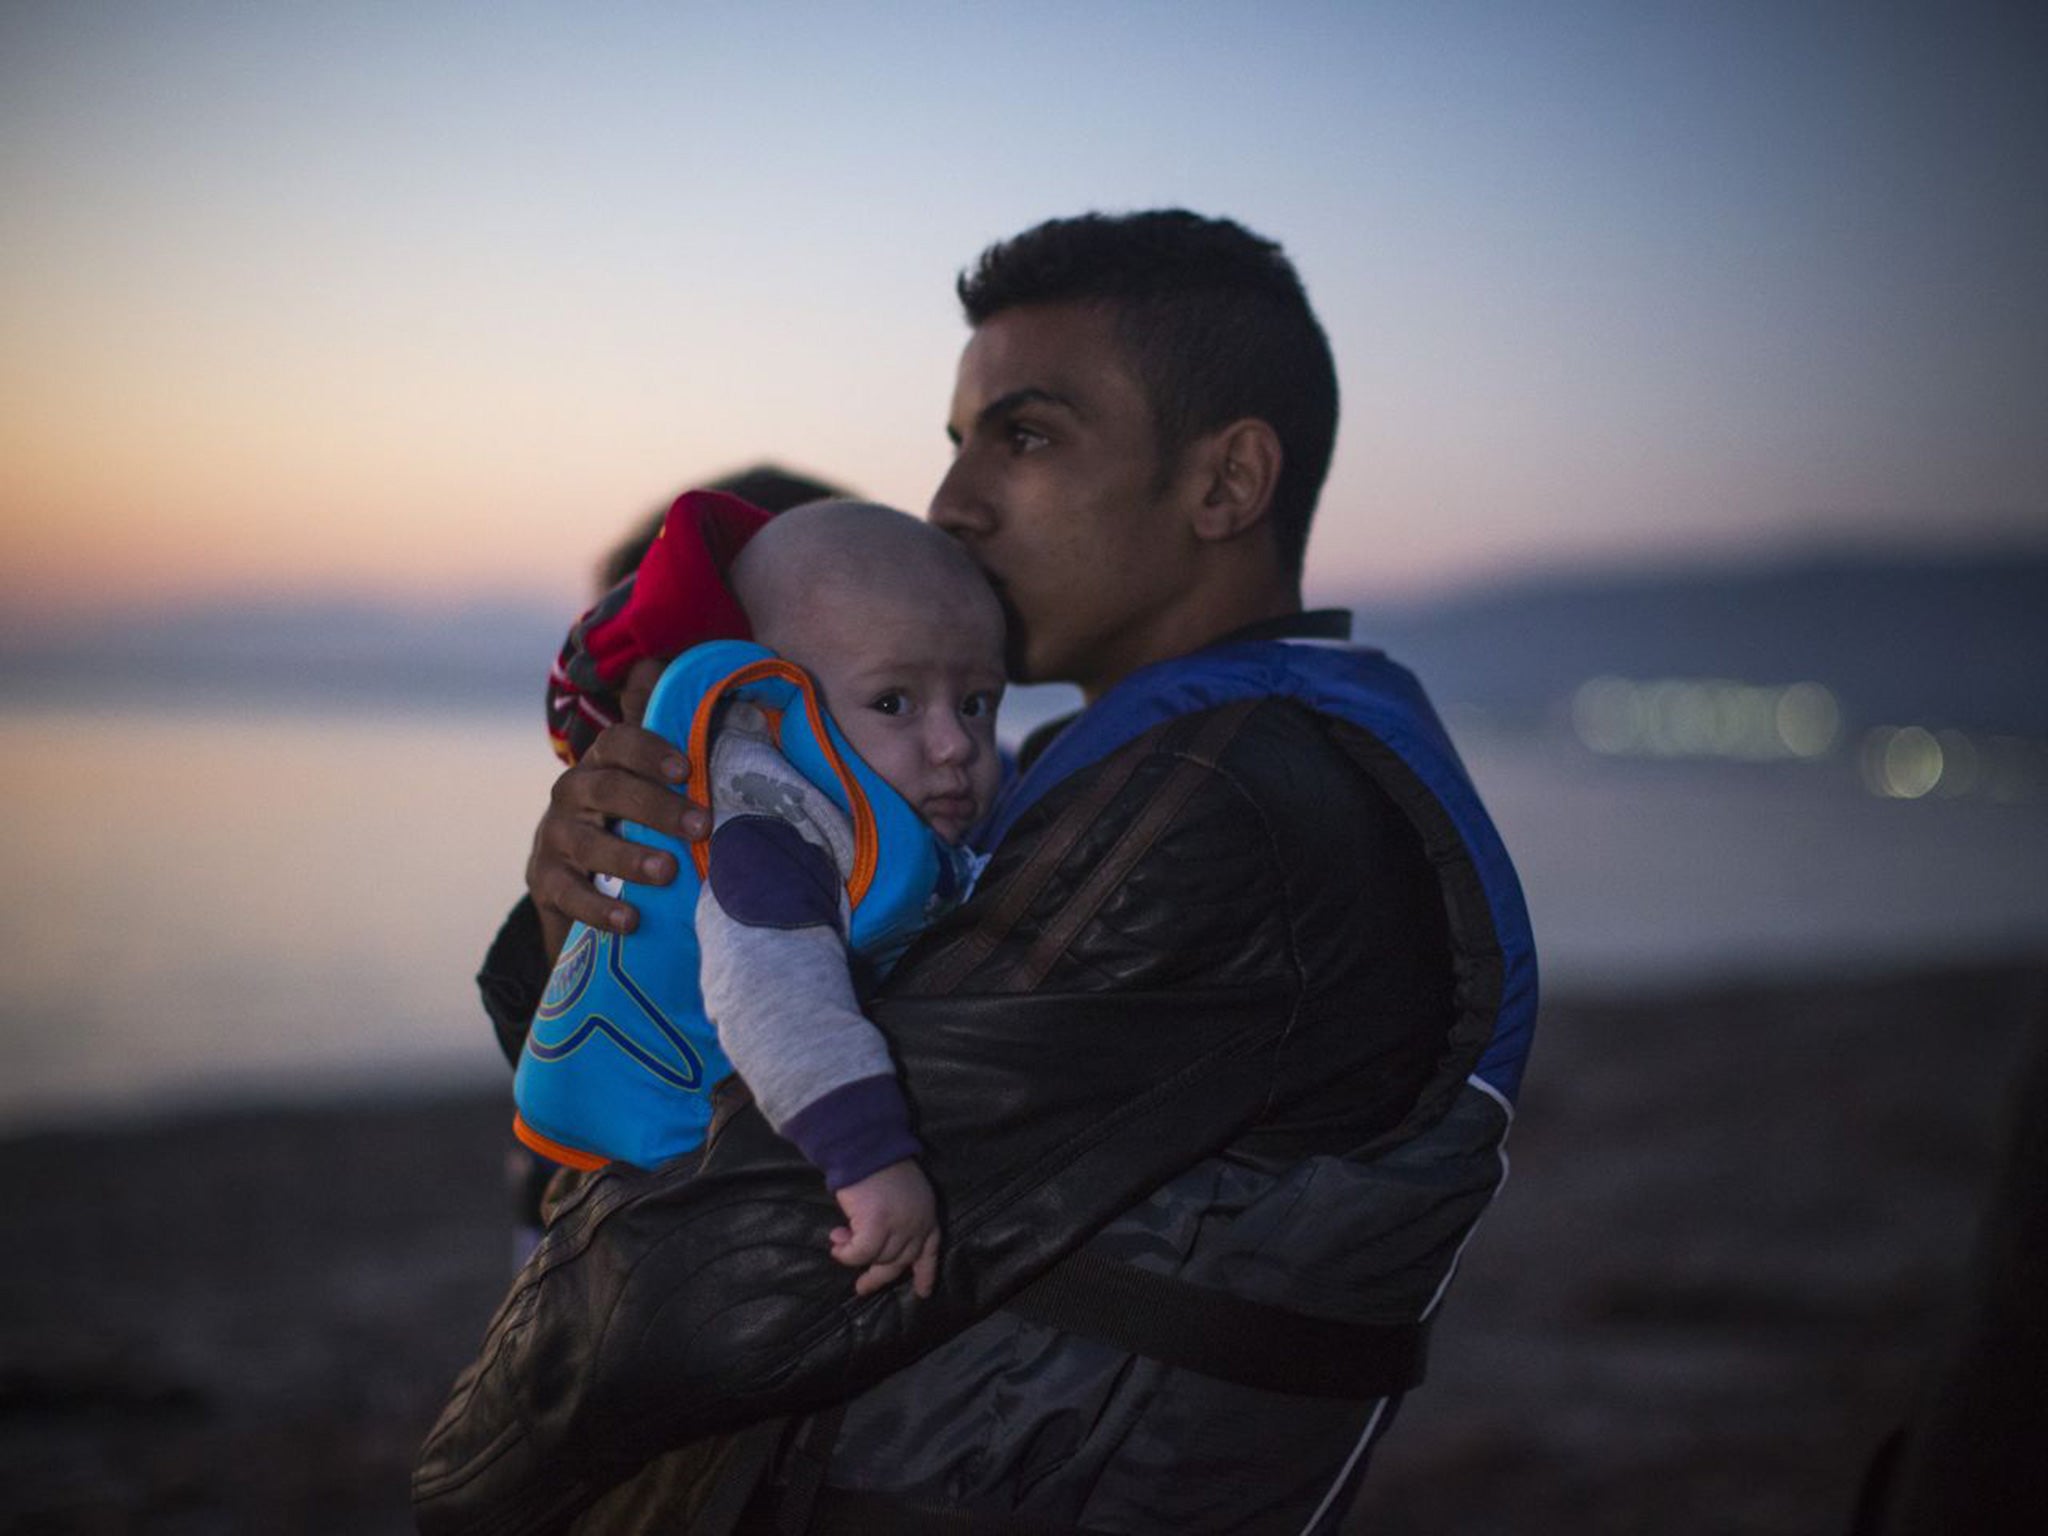 Two of the Syrian migrants who arrived by inflatable dinghy on Kos island from Turkey yesterday, at dawn